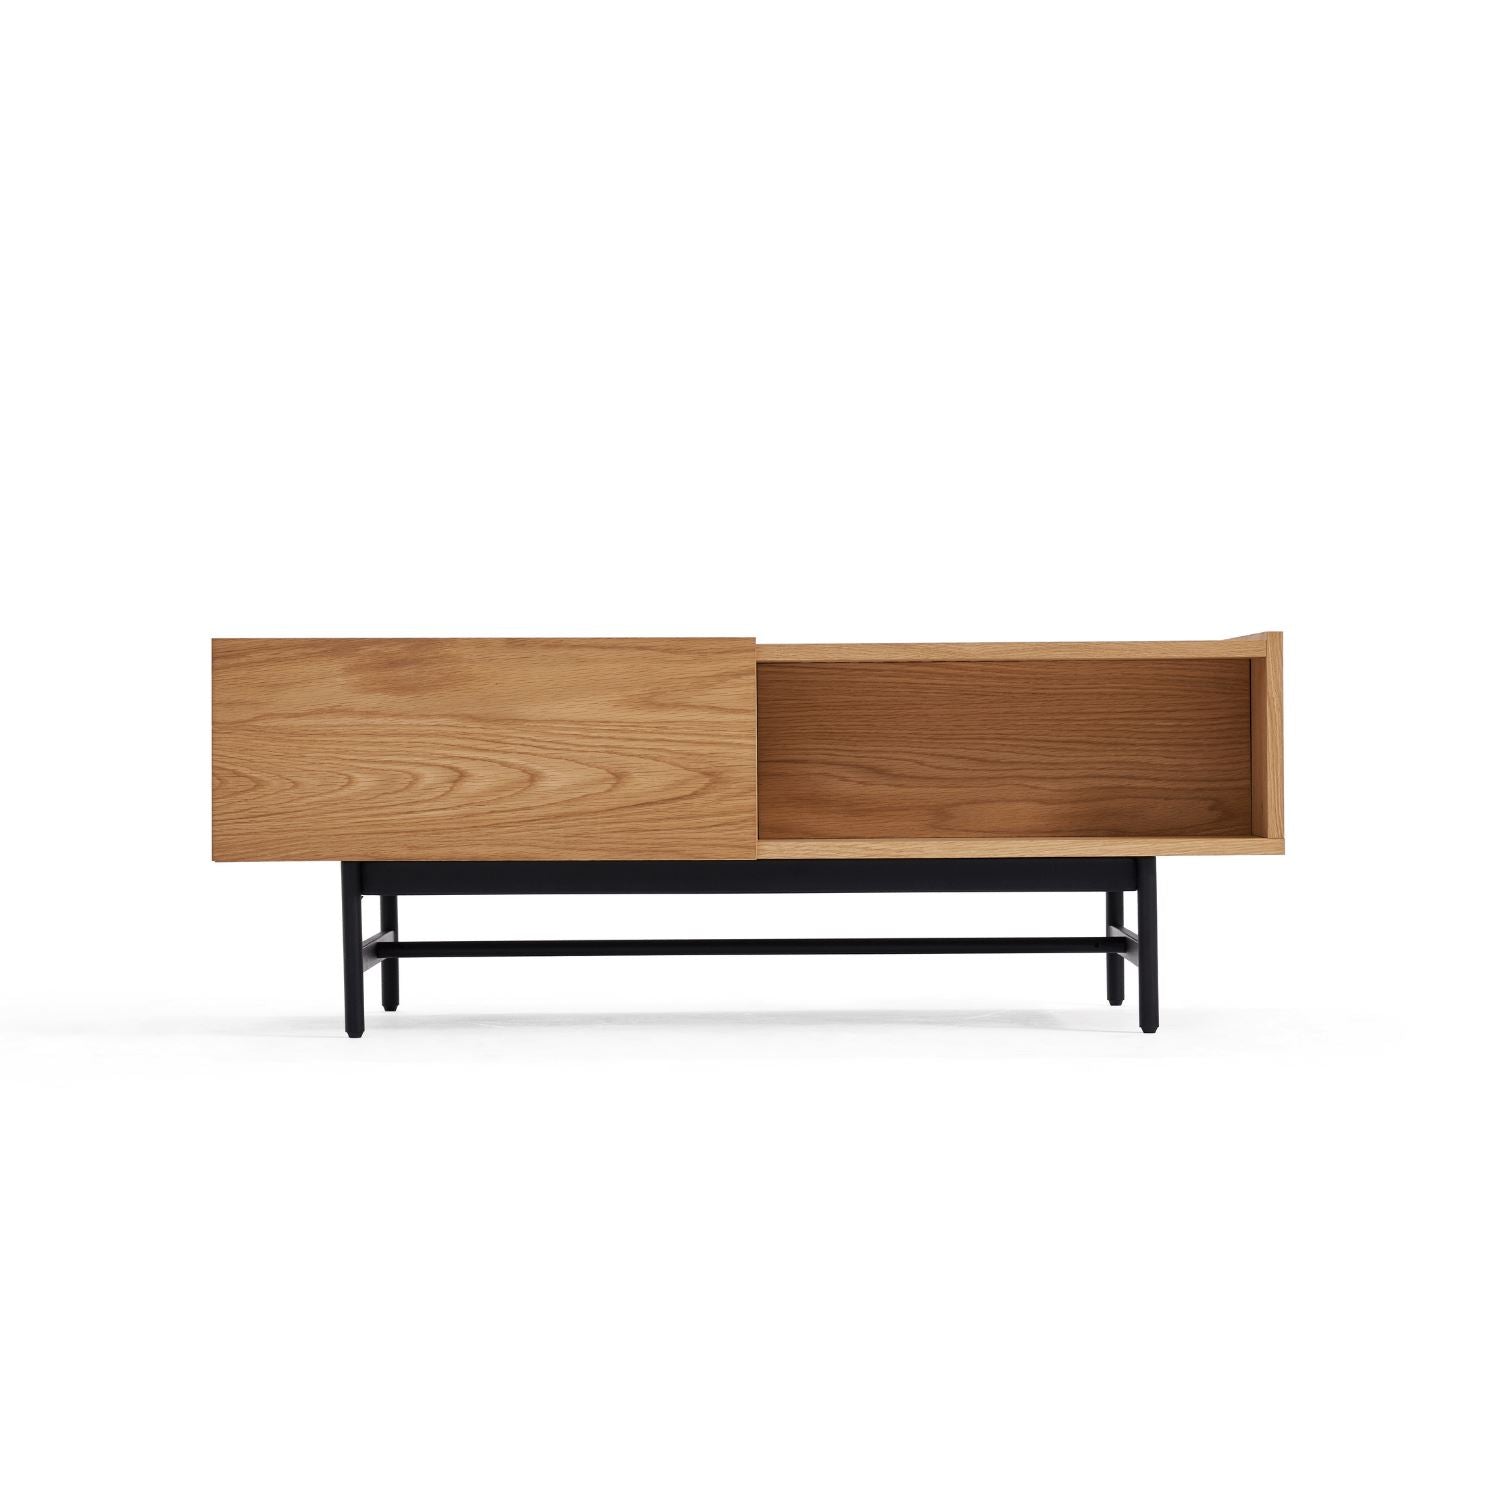 Valmor Coffee Table - Valyou 